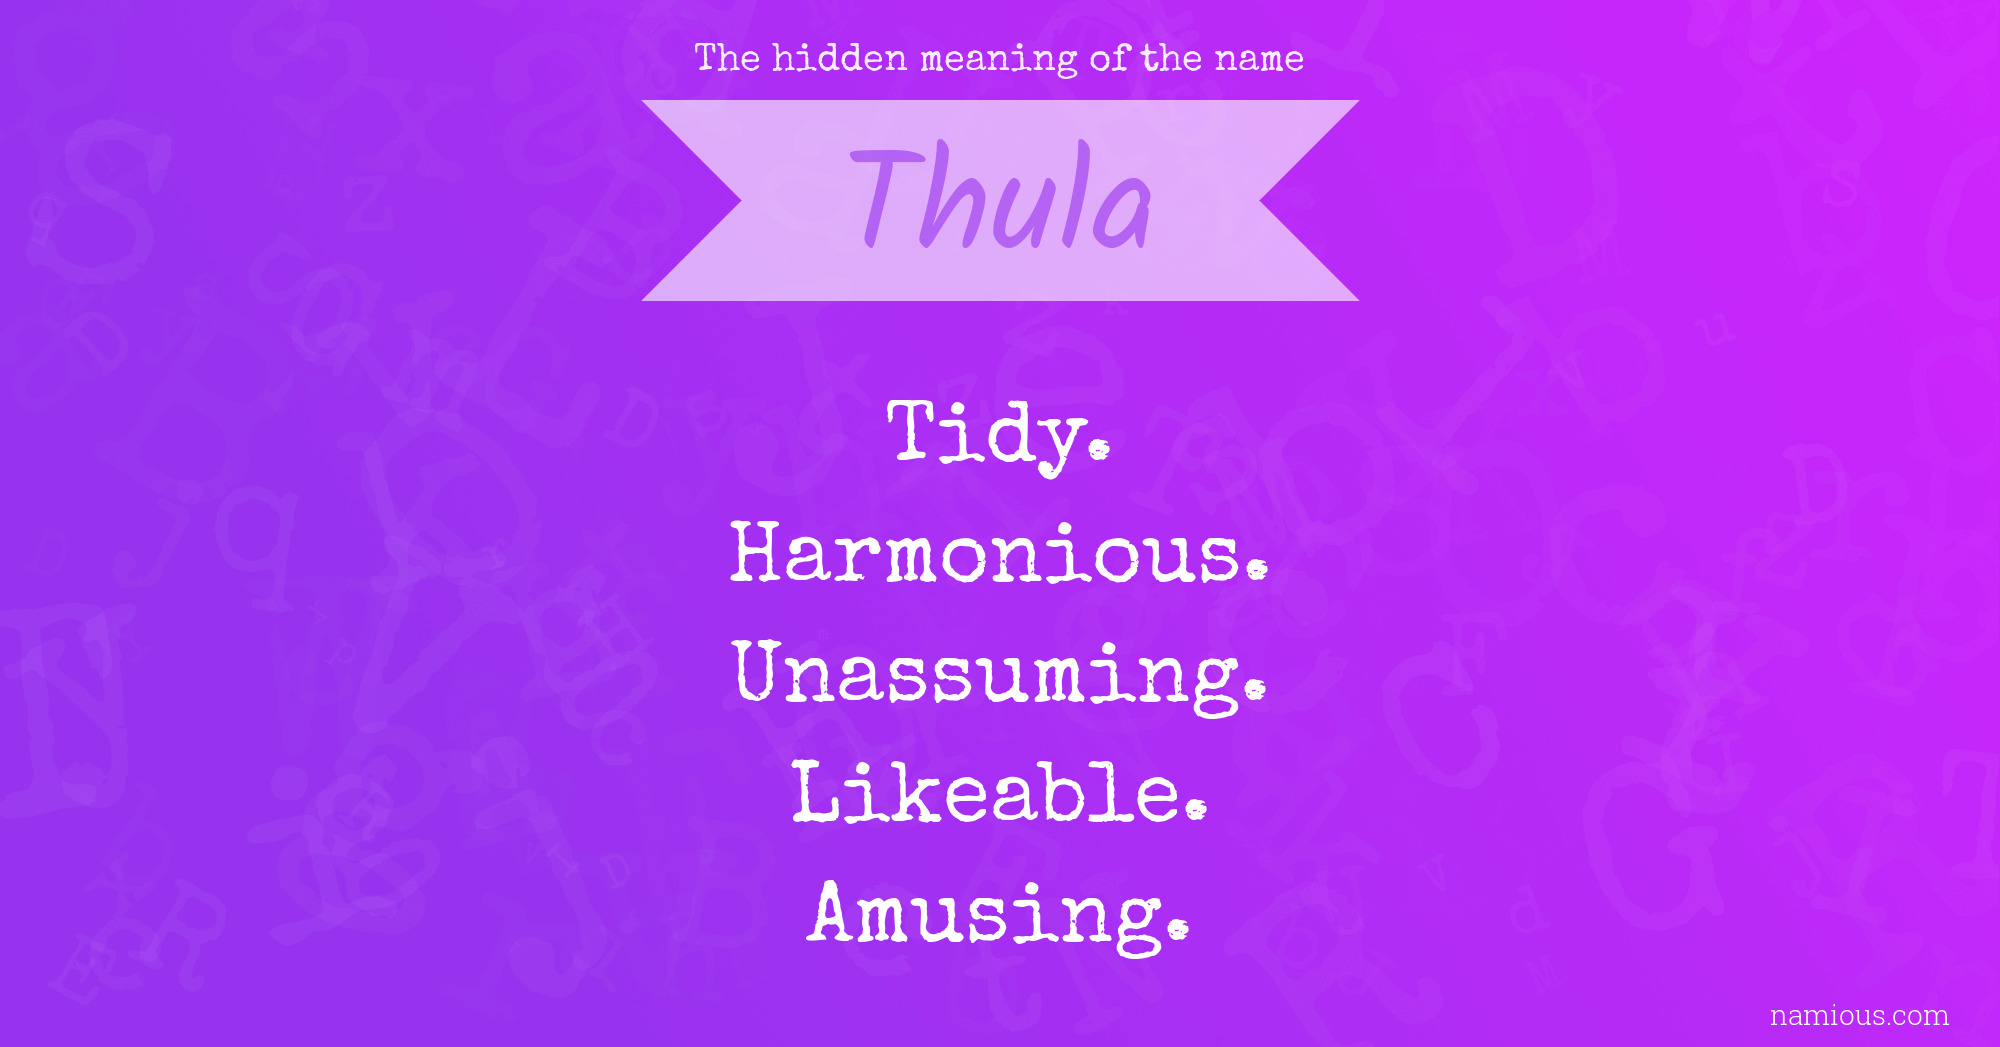 The hidden meaning of the name Thula